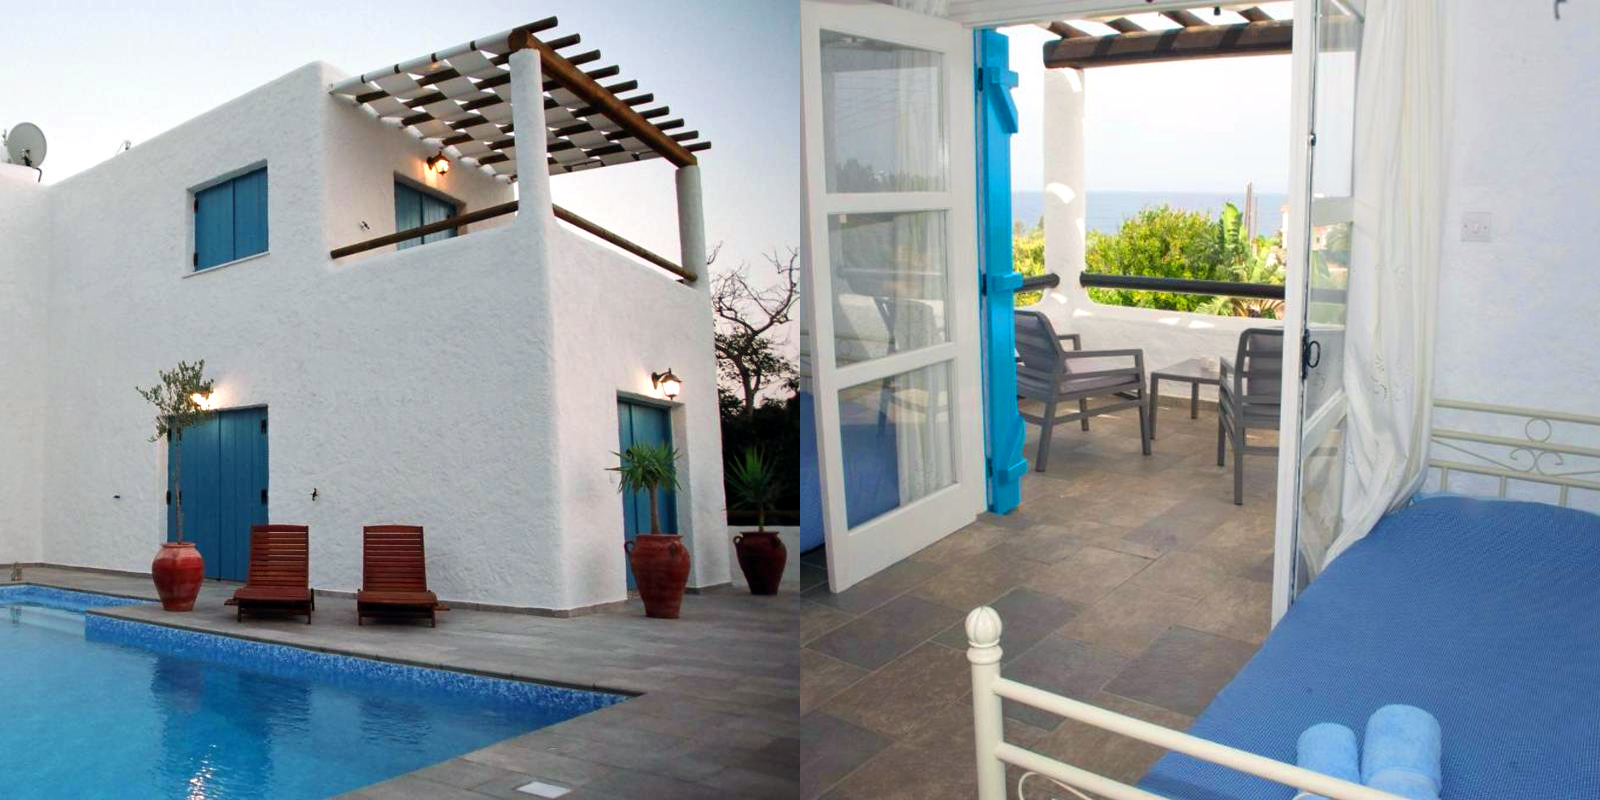 Beach <br />Villa Pantheon accommodation in pafos”></p>
<h3><b>Votsalo villa</b></h3>
<p><b>Where to stay?</b></p>
<div>Boasting air-conditioned accommodation with a private pool, garden view and a terrace, <a class=